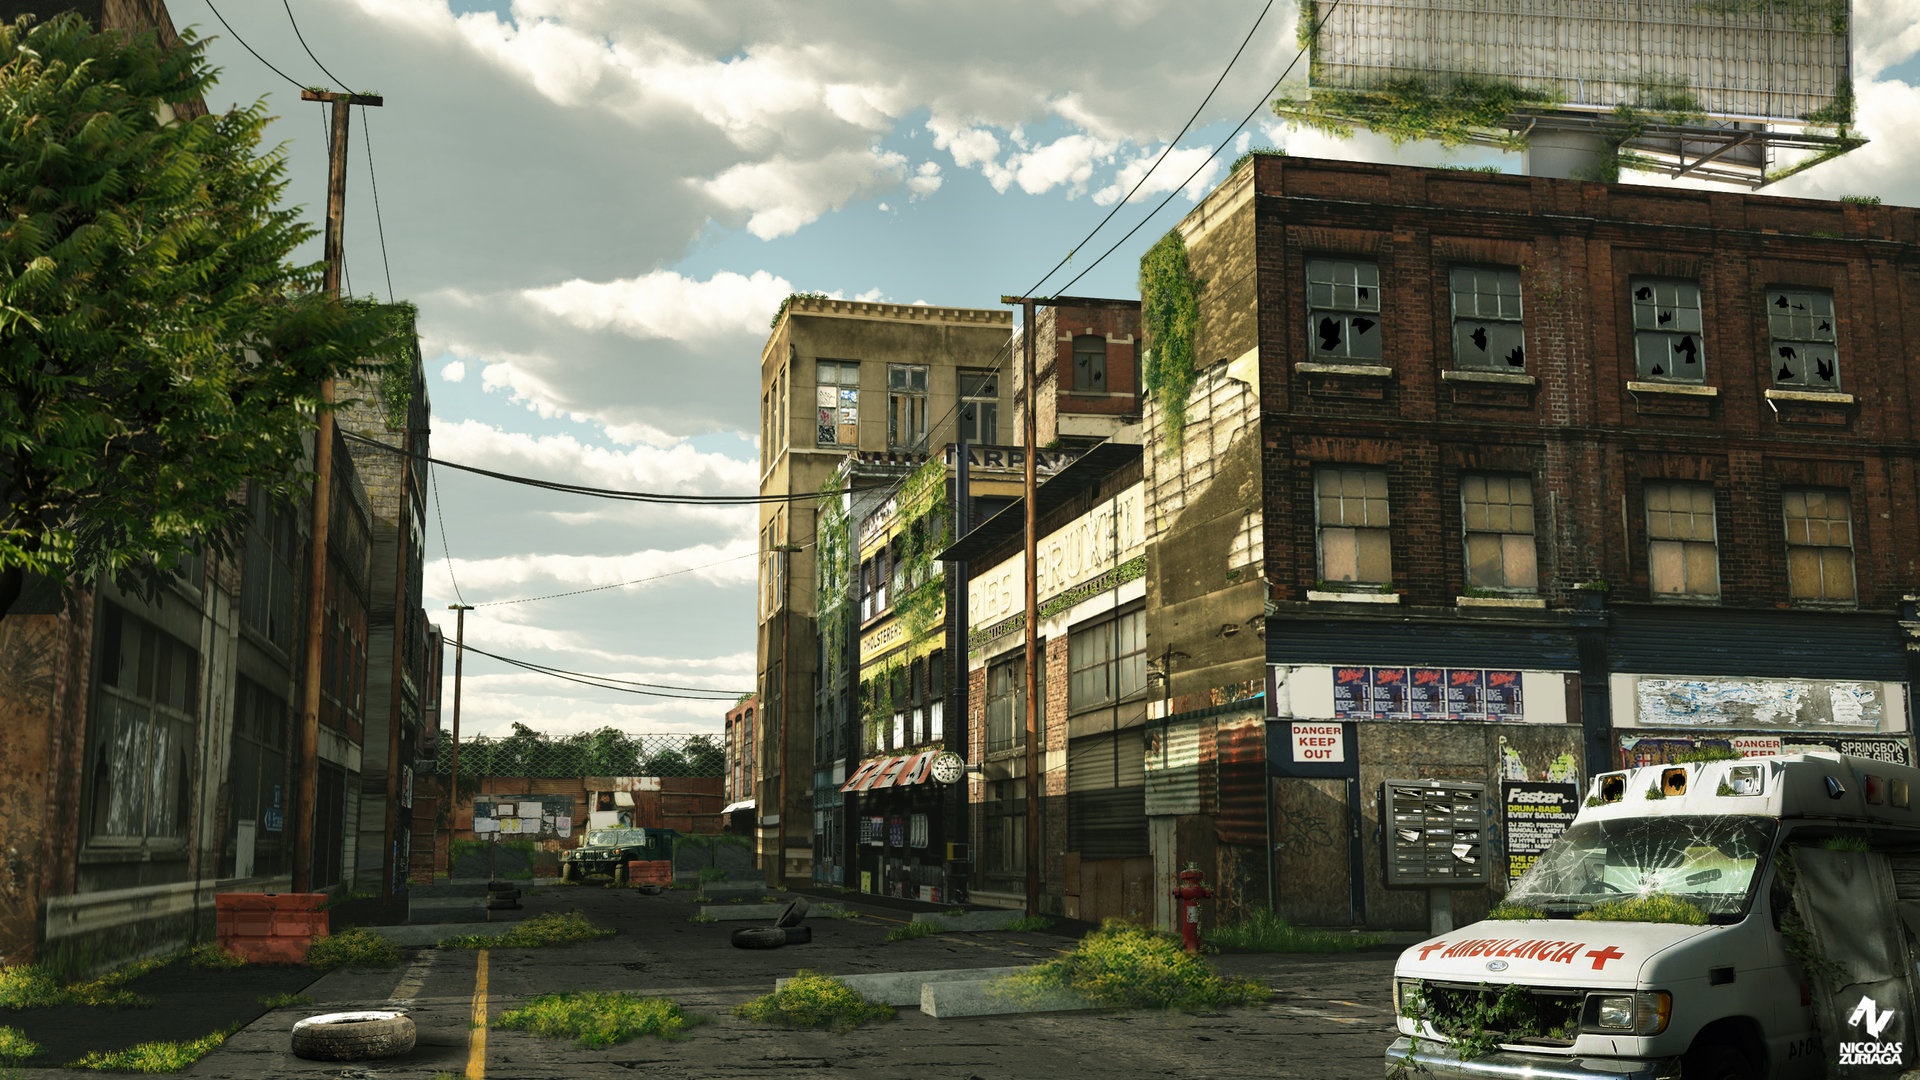 Town of us 3 3 1. The last of us город заброшенный. Ласт оф АС город. The last of us здания. Заброшенный город дфые ща гы.